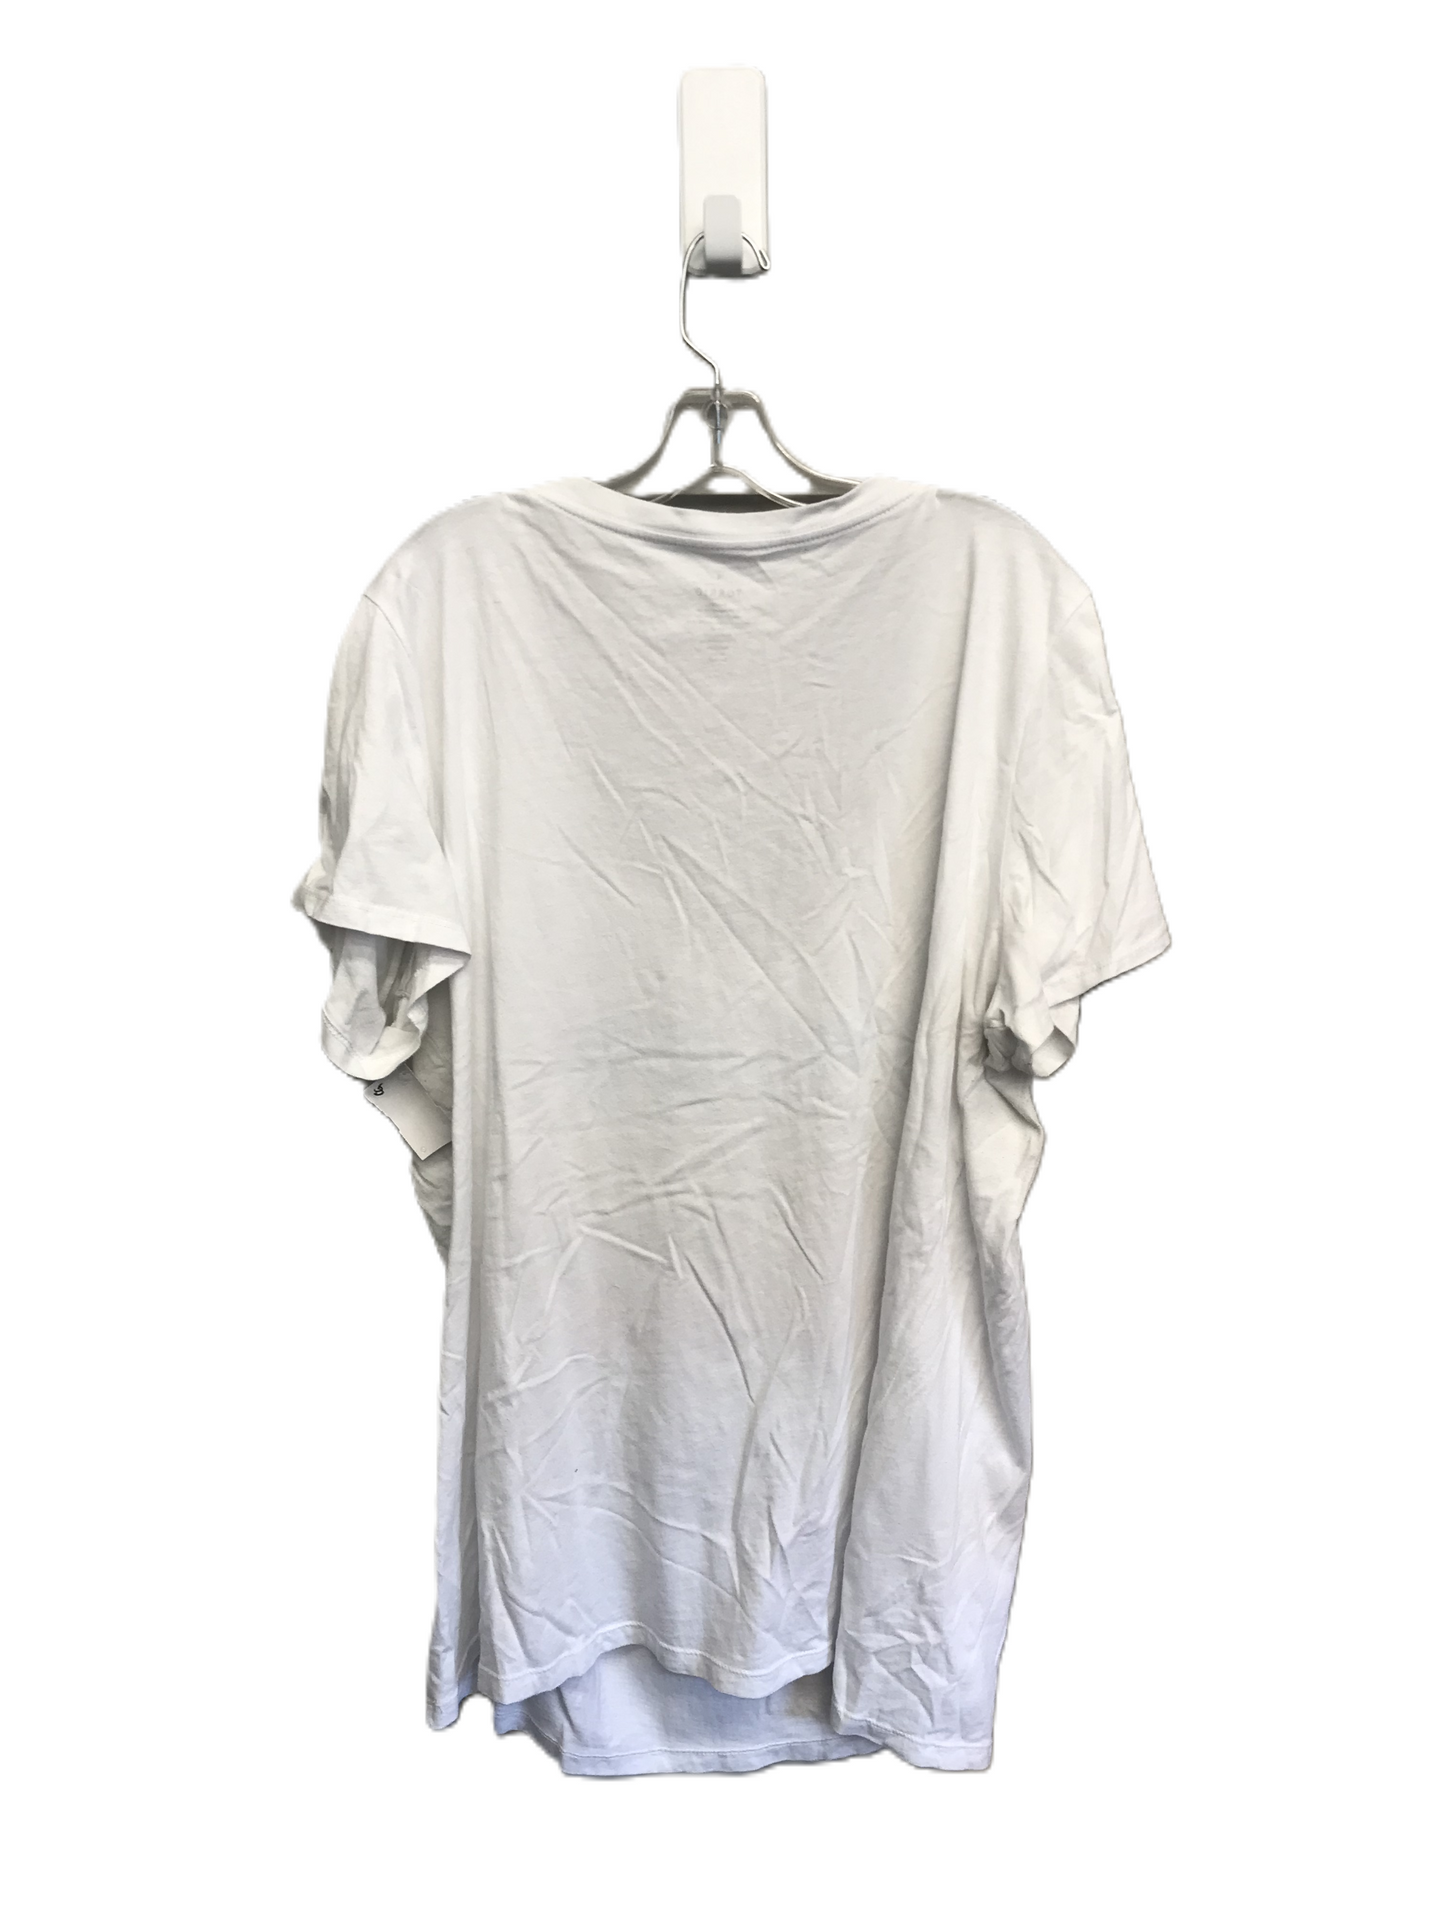 White Top Short Sleeve By Torrid, Size: 2x